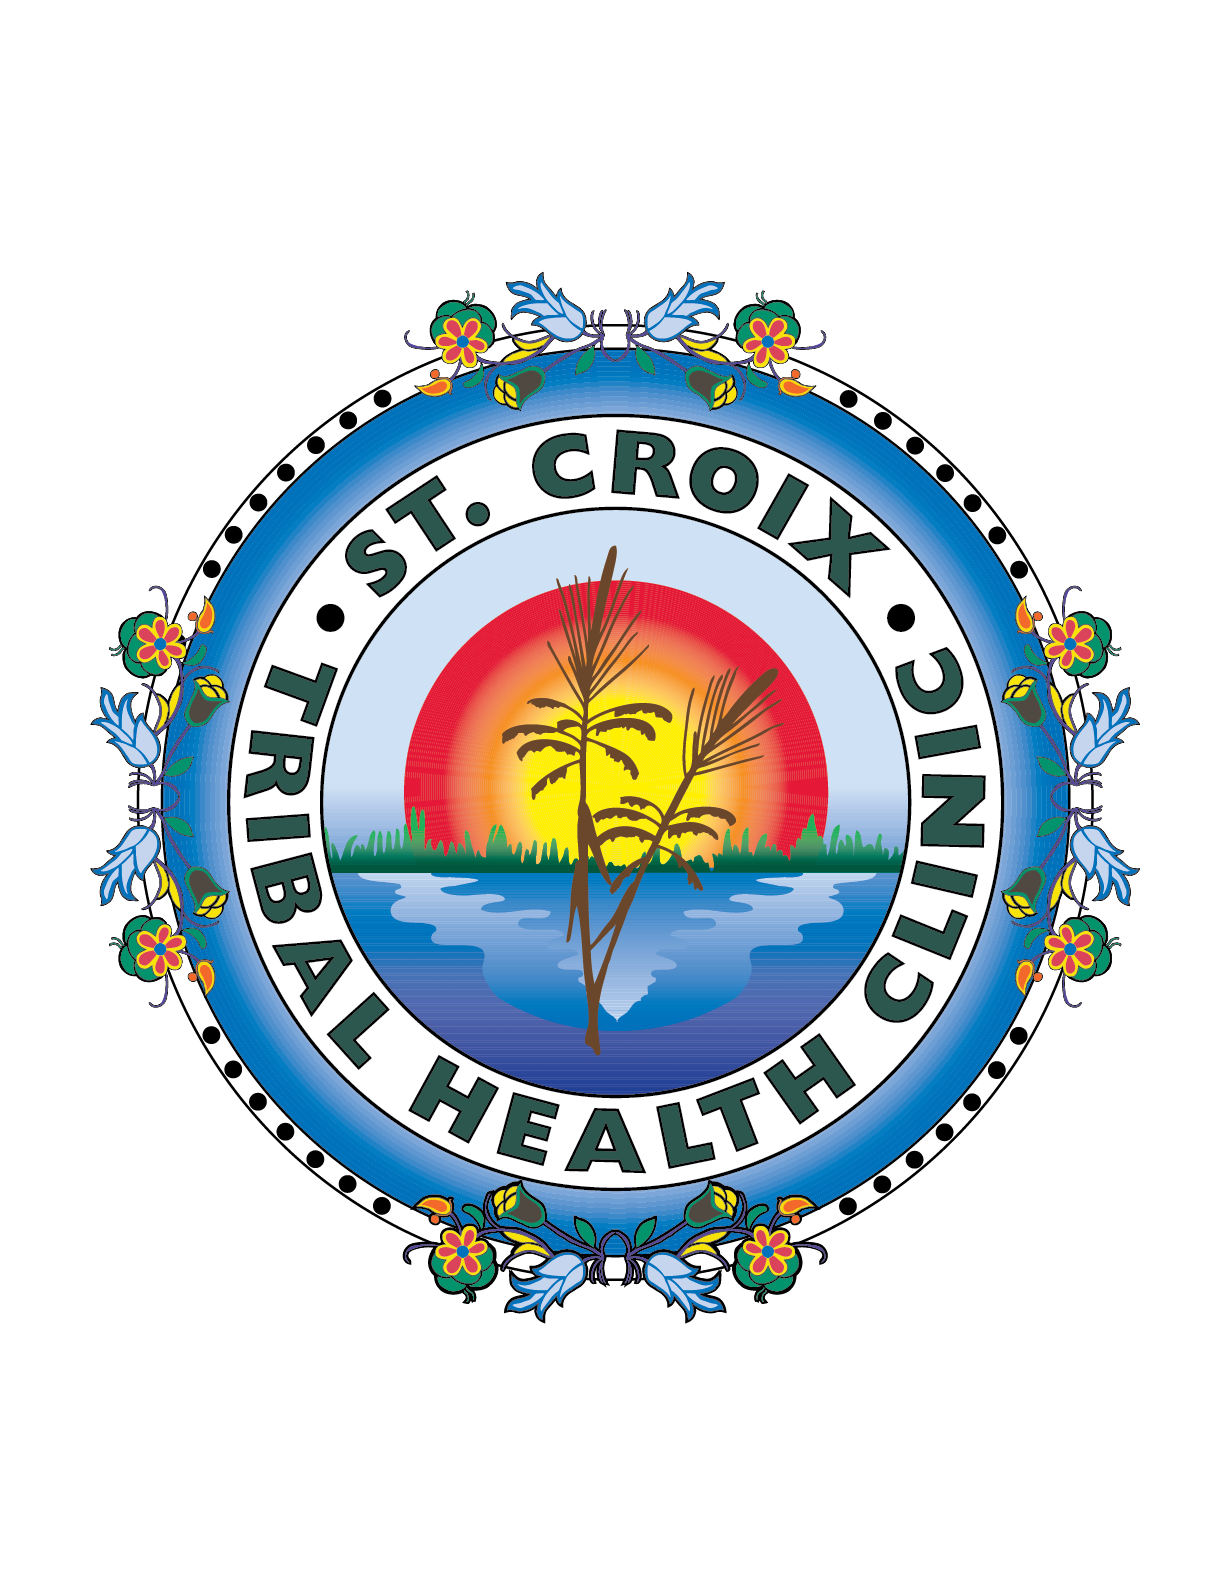 St. Croix Chippewa Indians of Wisconsin Health and Human Services